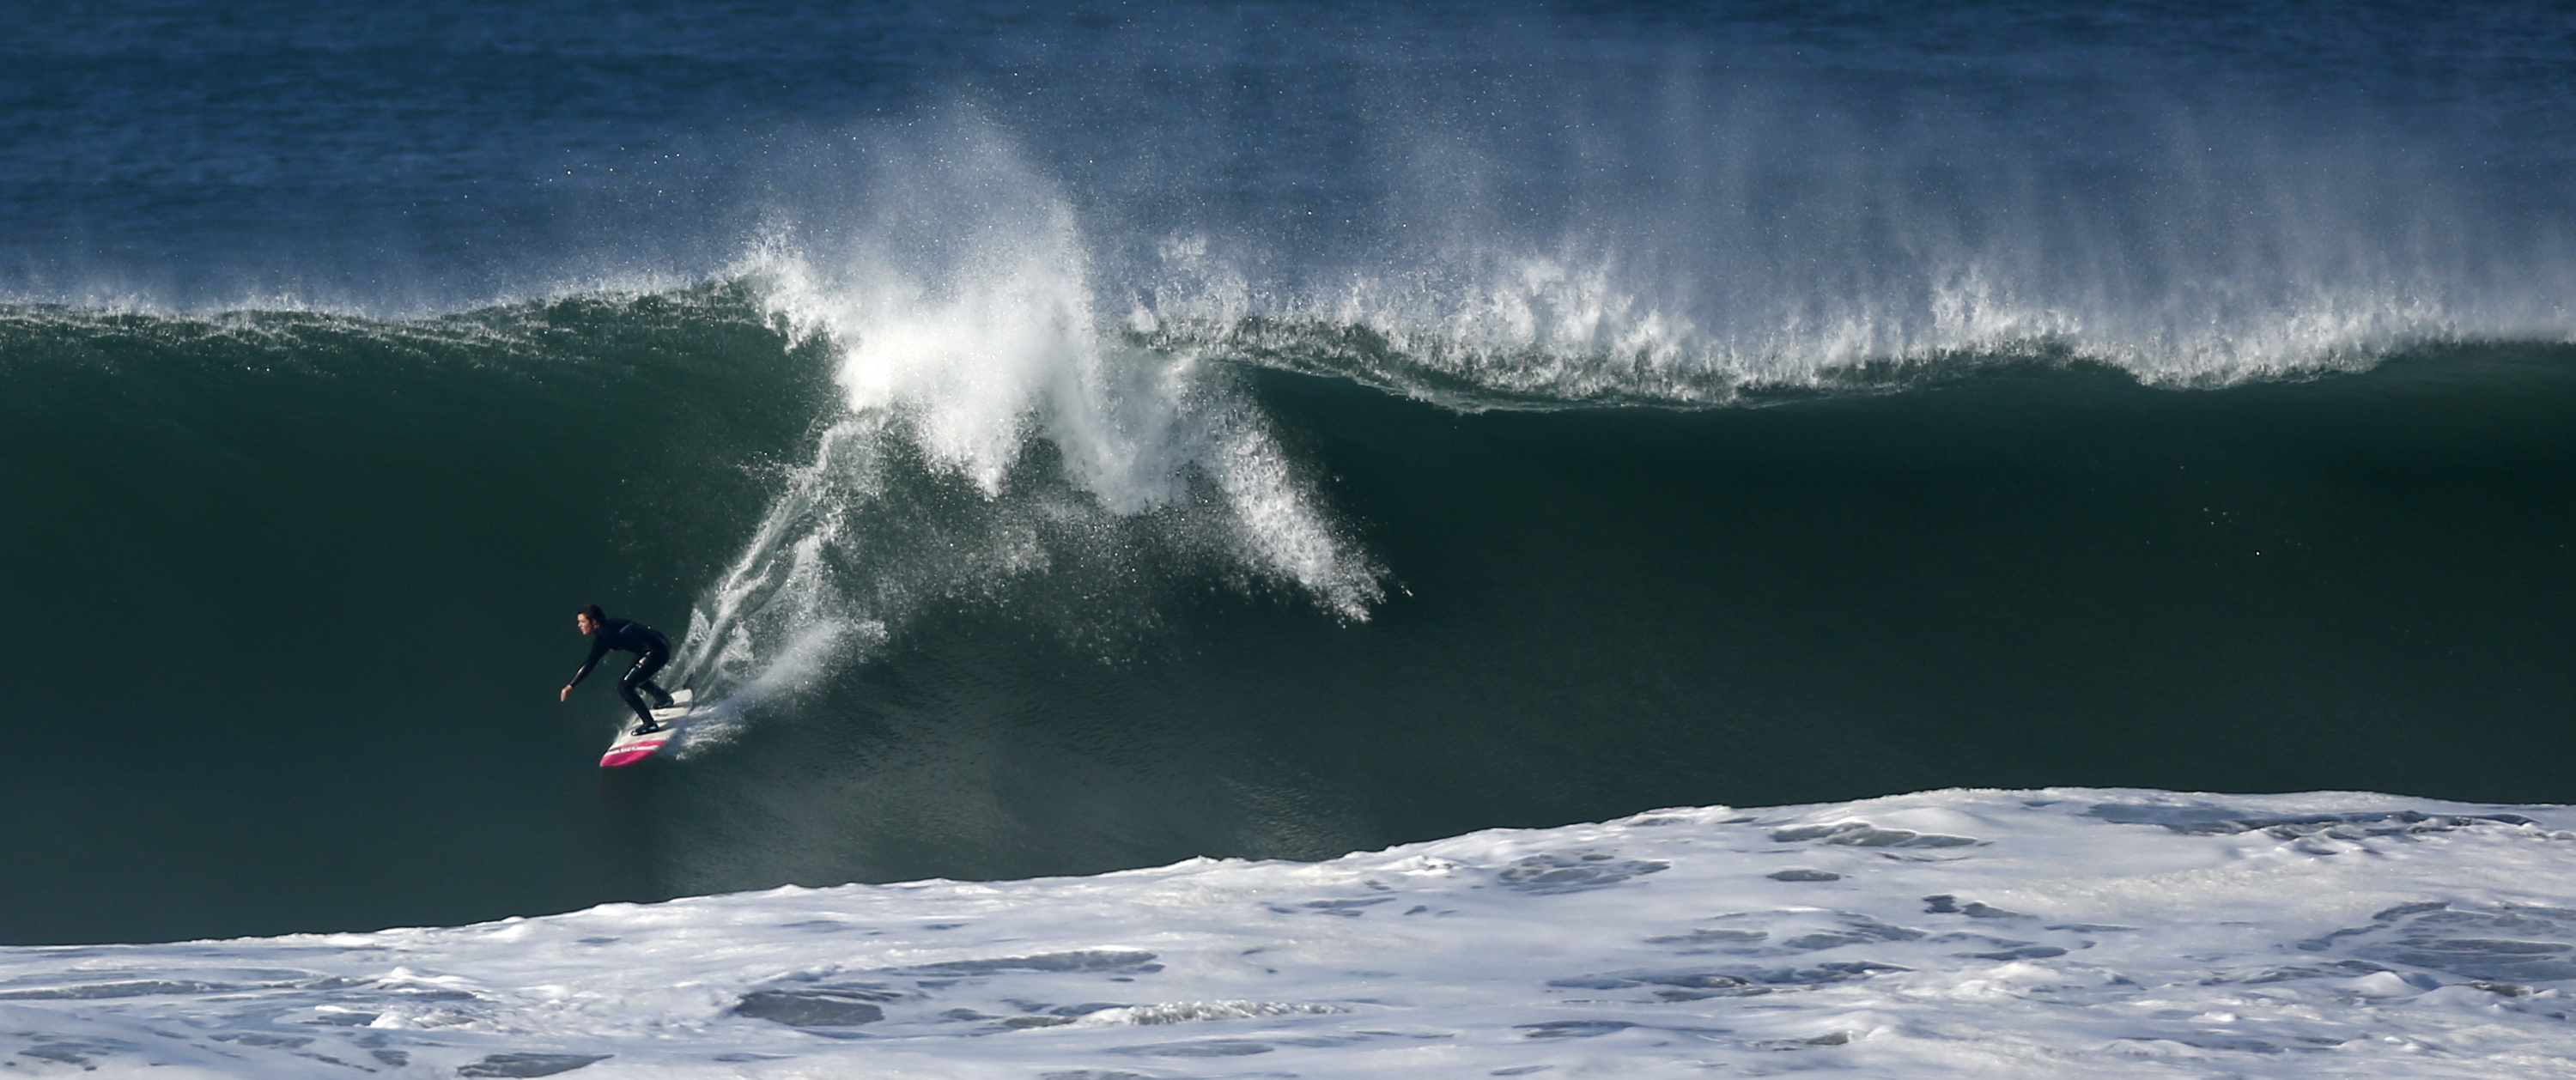 A surfer rides a large, powerful wave with white foam at the base, in the deep blue ocean, creating a dynamic and intense scene full of motion.